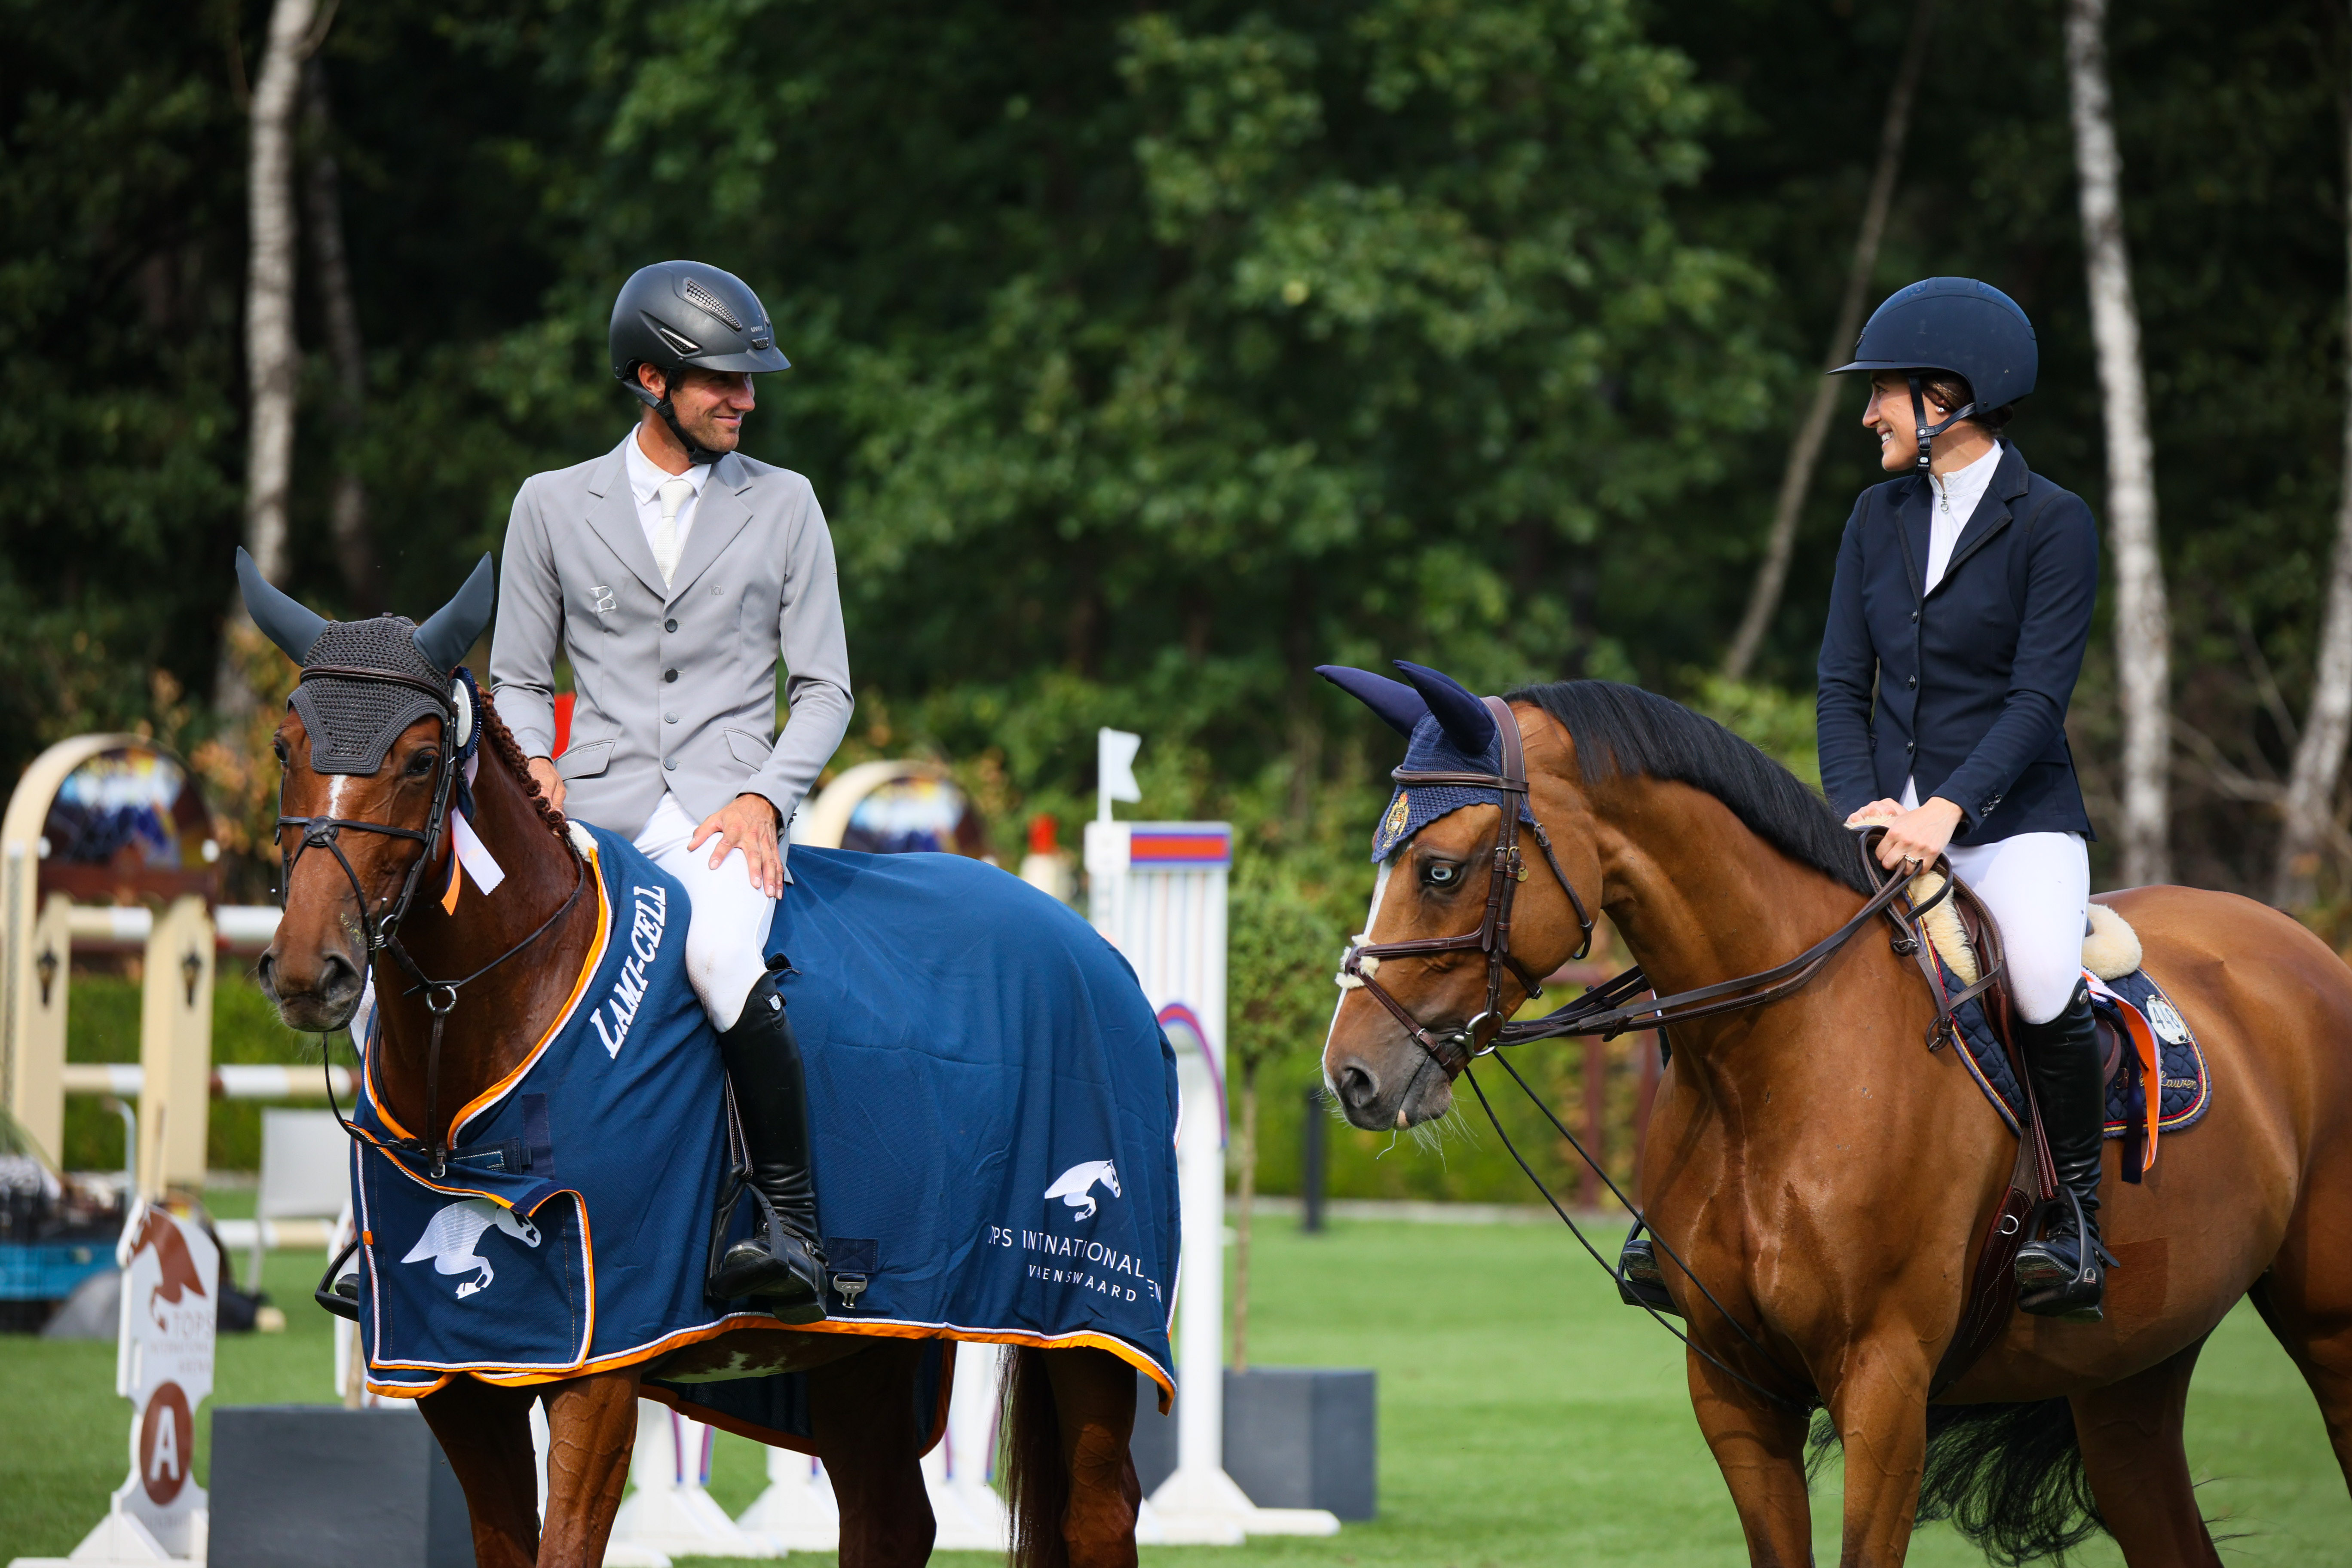 Kukuk knocks Springsteen off top spot and wins the 1.50m CSI4* at Valkenswaard